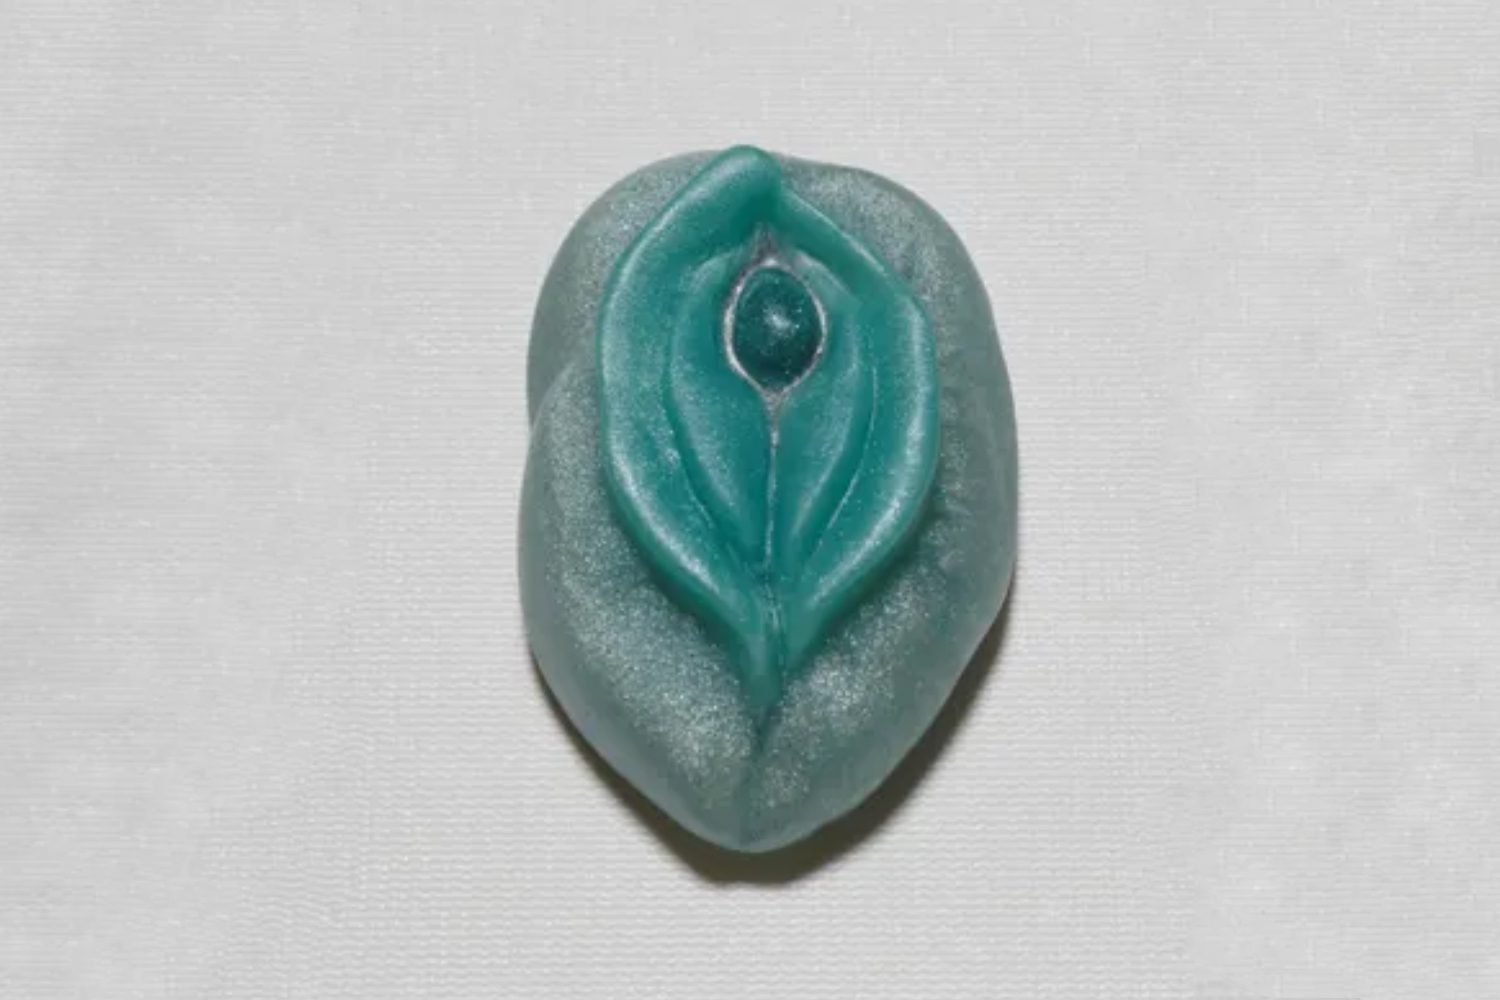 A green leaf shaped bead with a blue center.